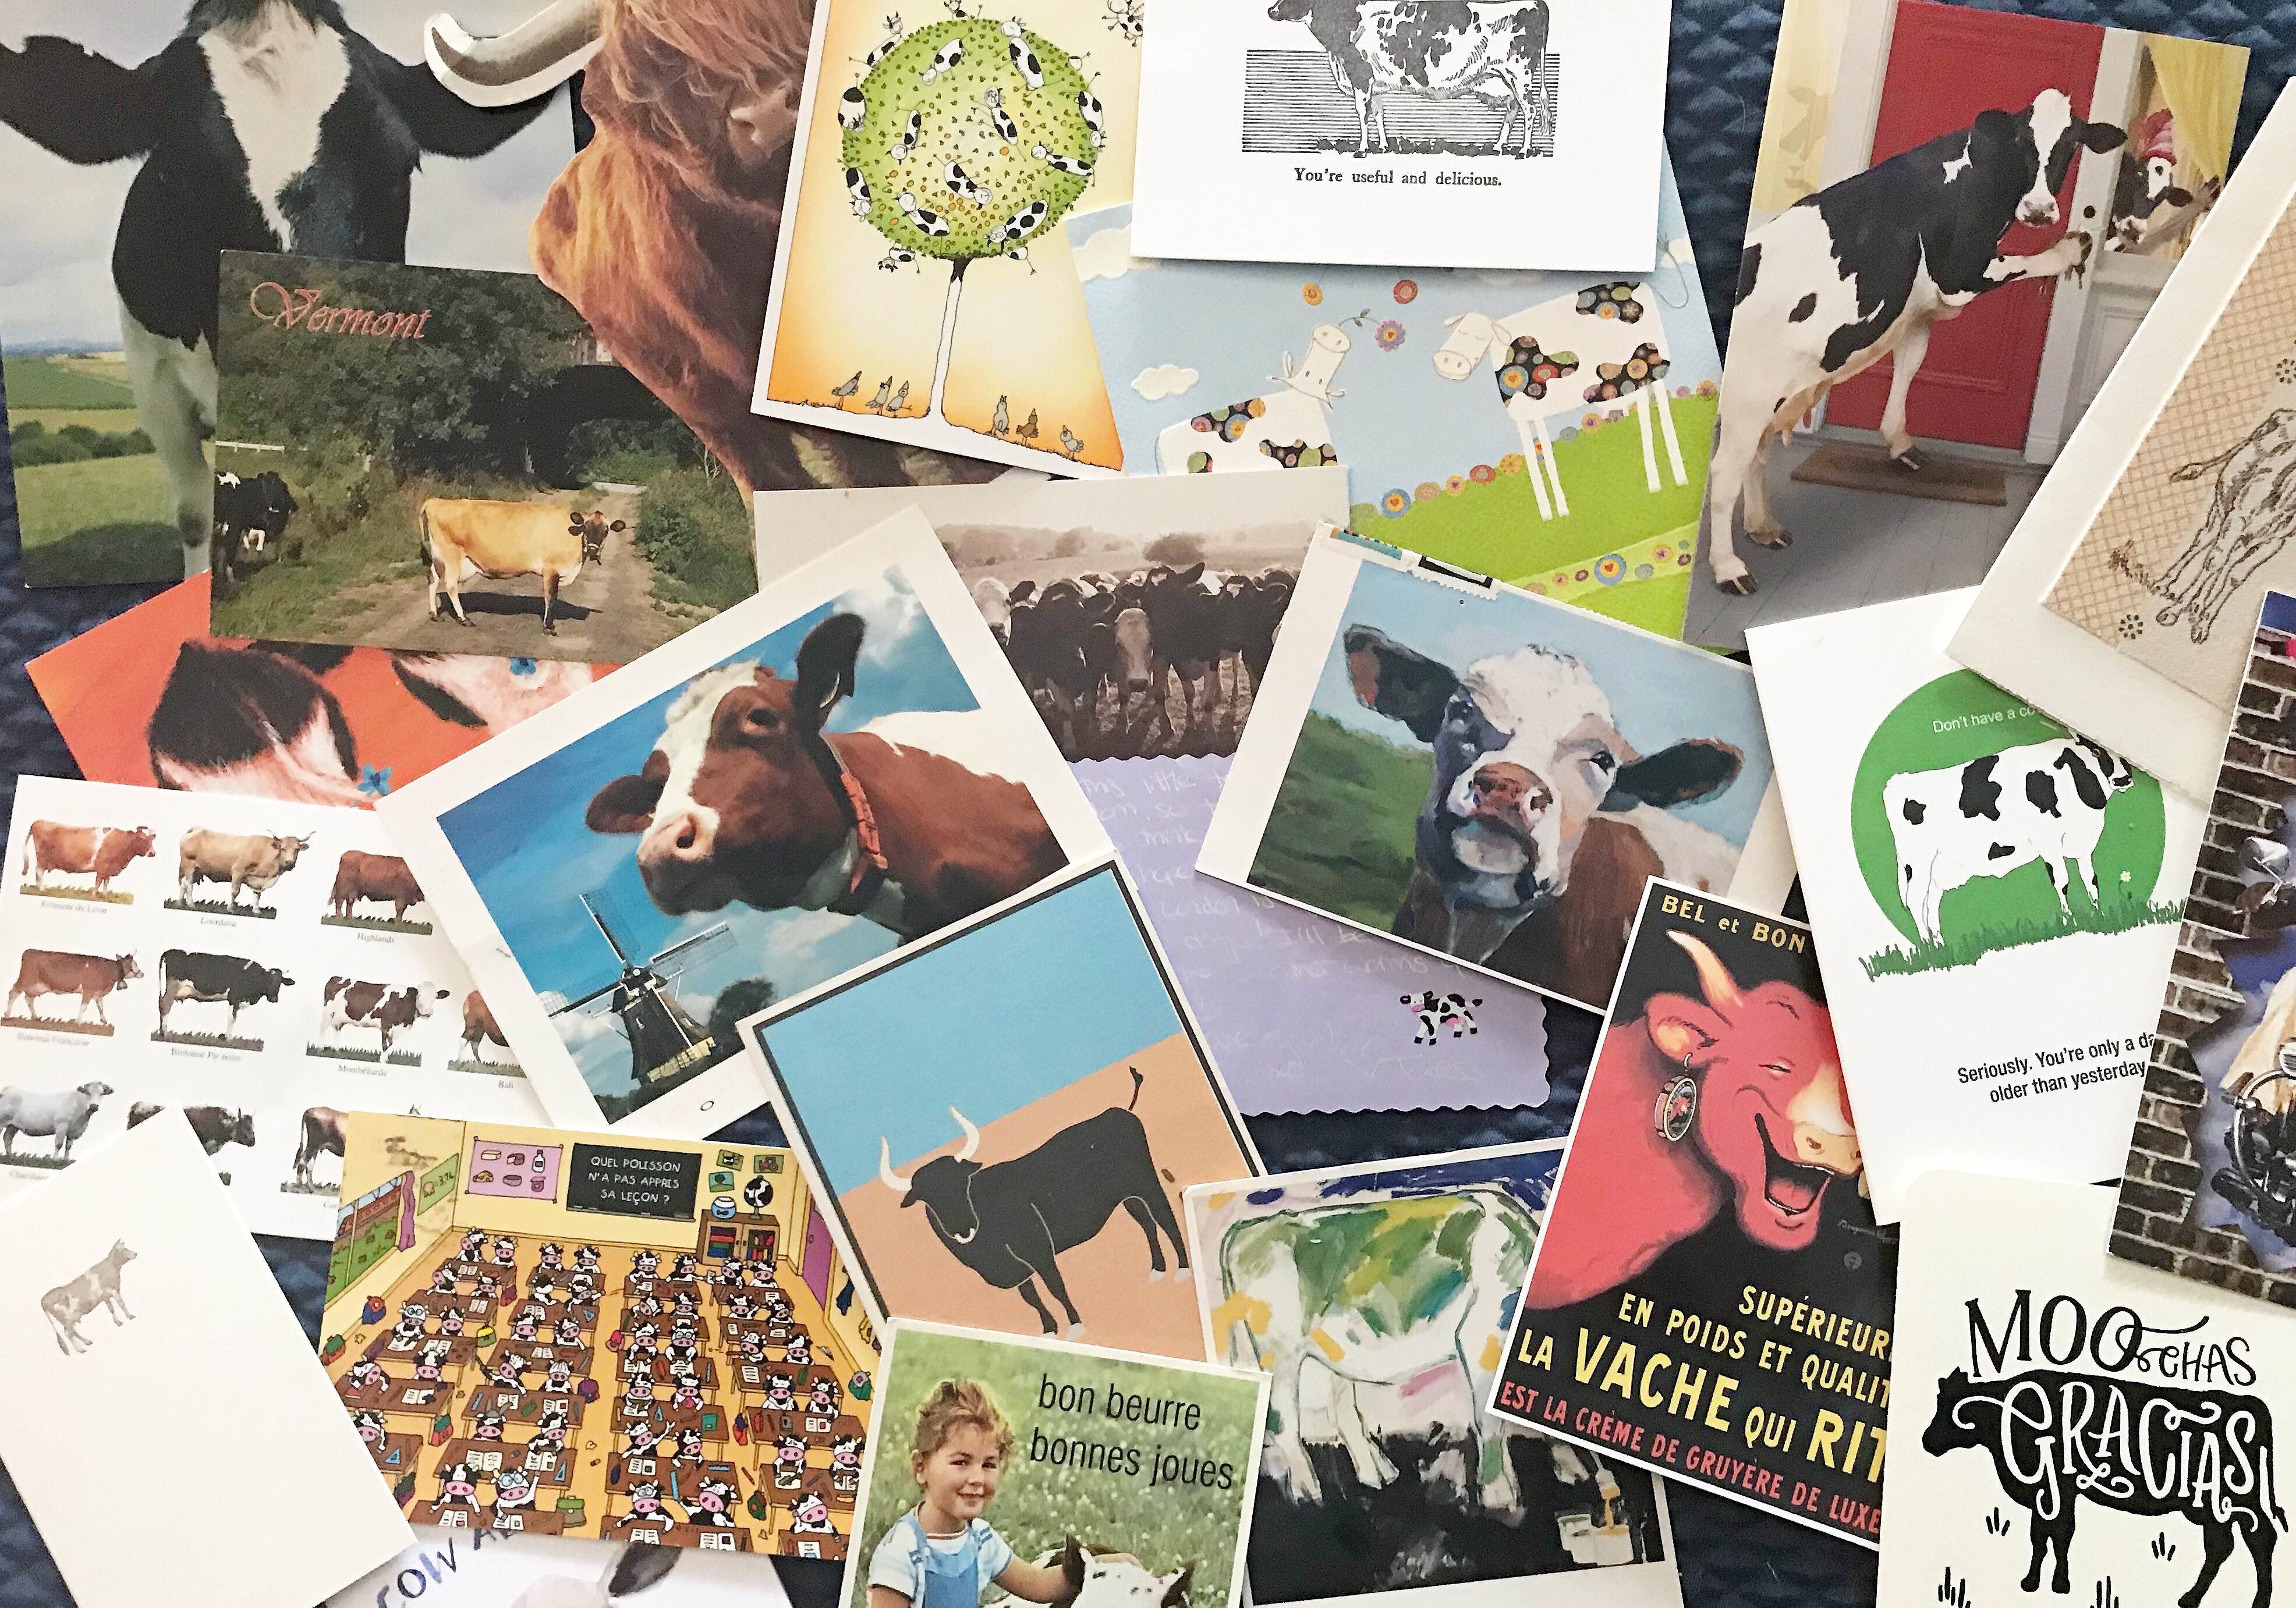 My best friend and I have a long standing tradition of sending each other cow cards - going on 20 years now. These are the cards I've saved.